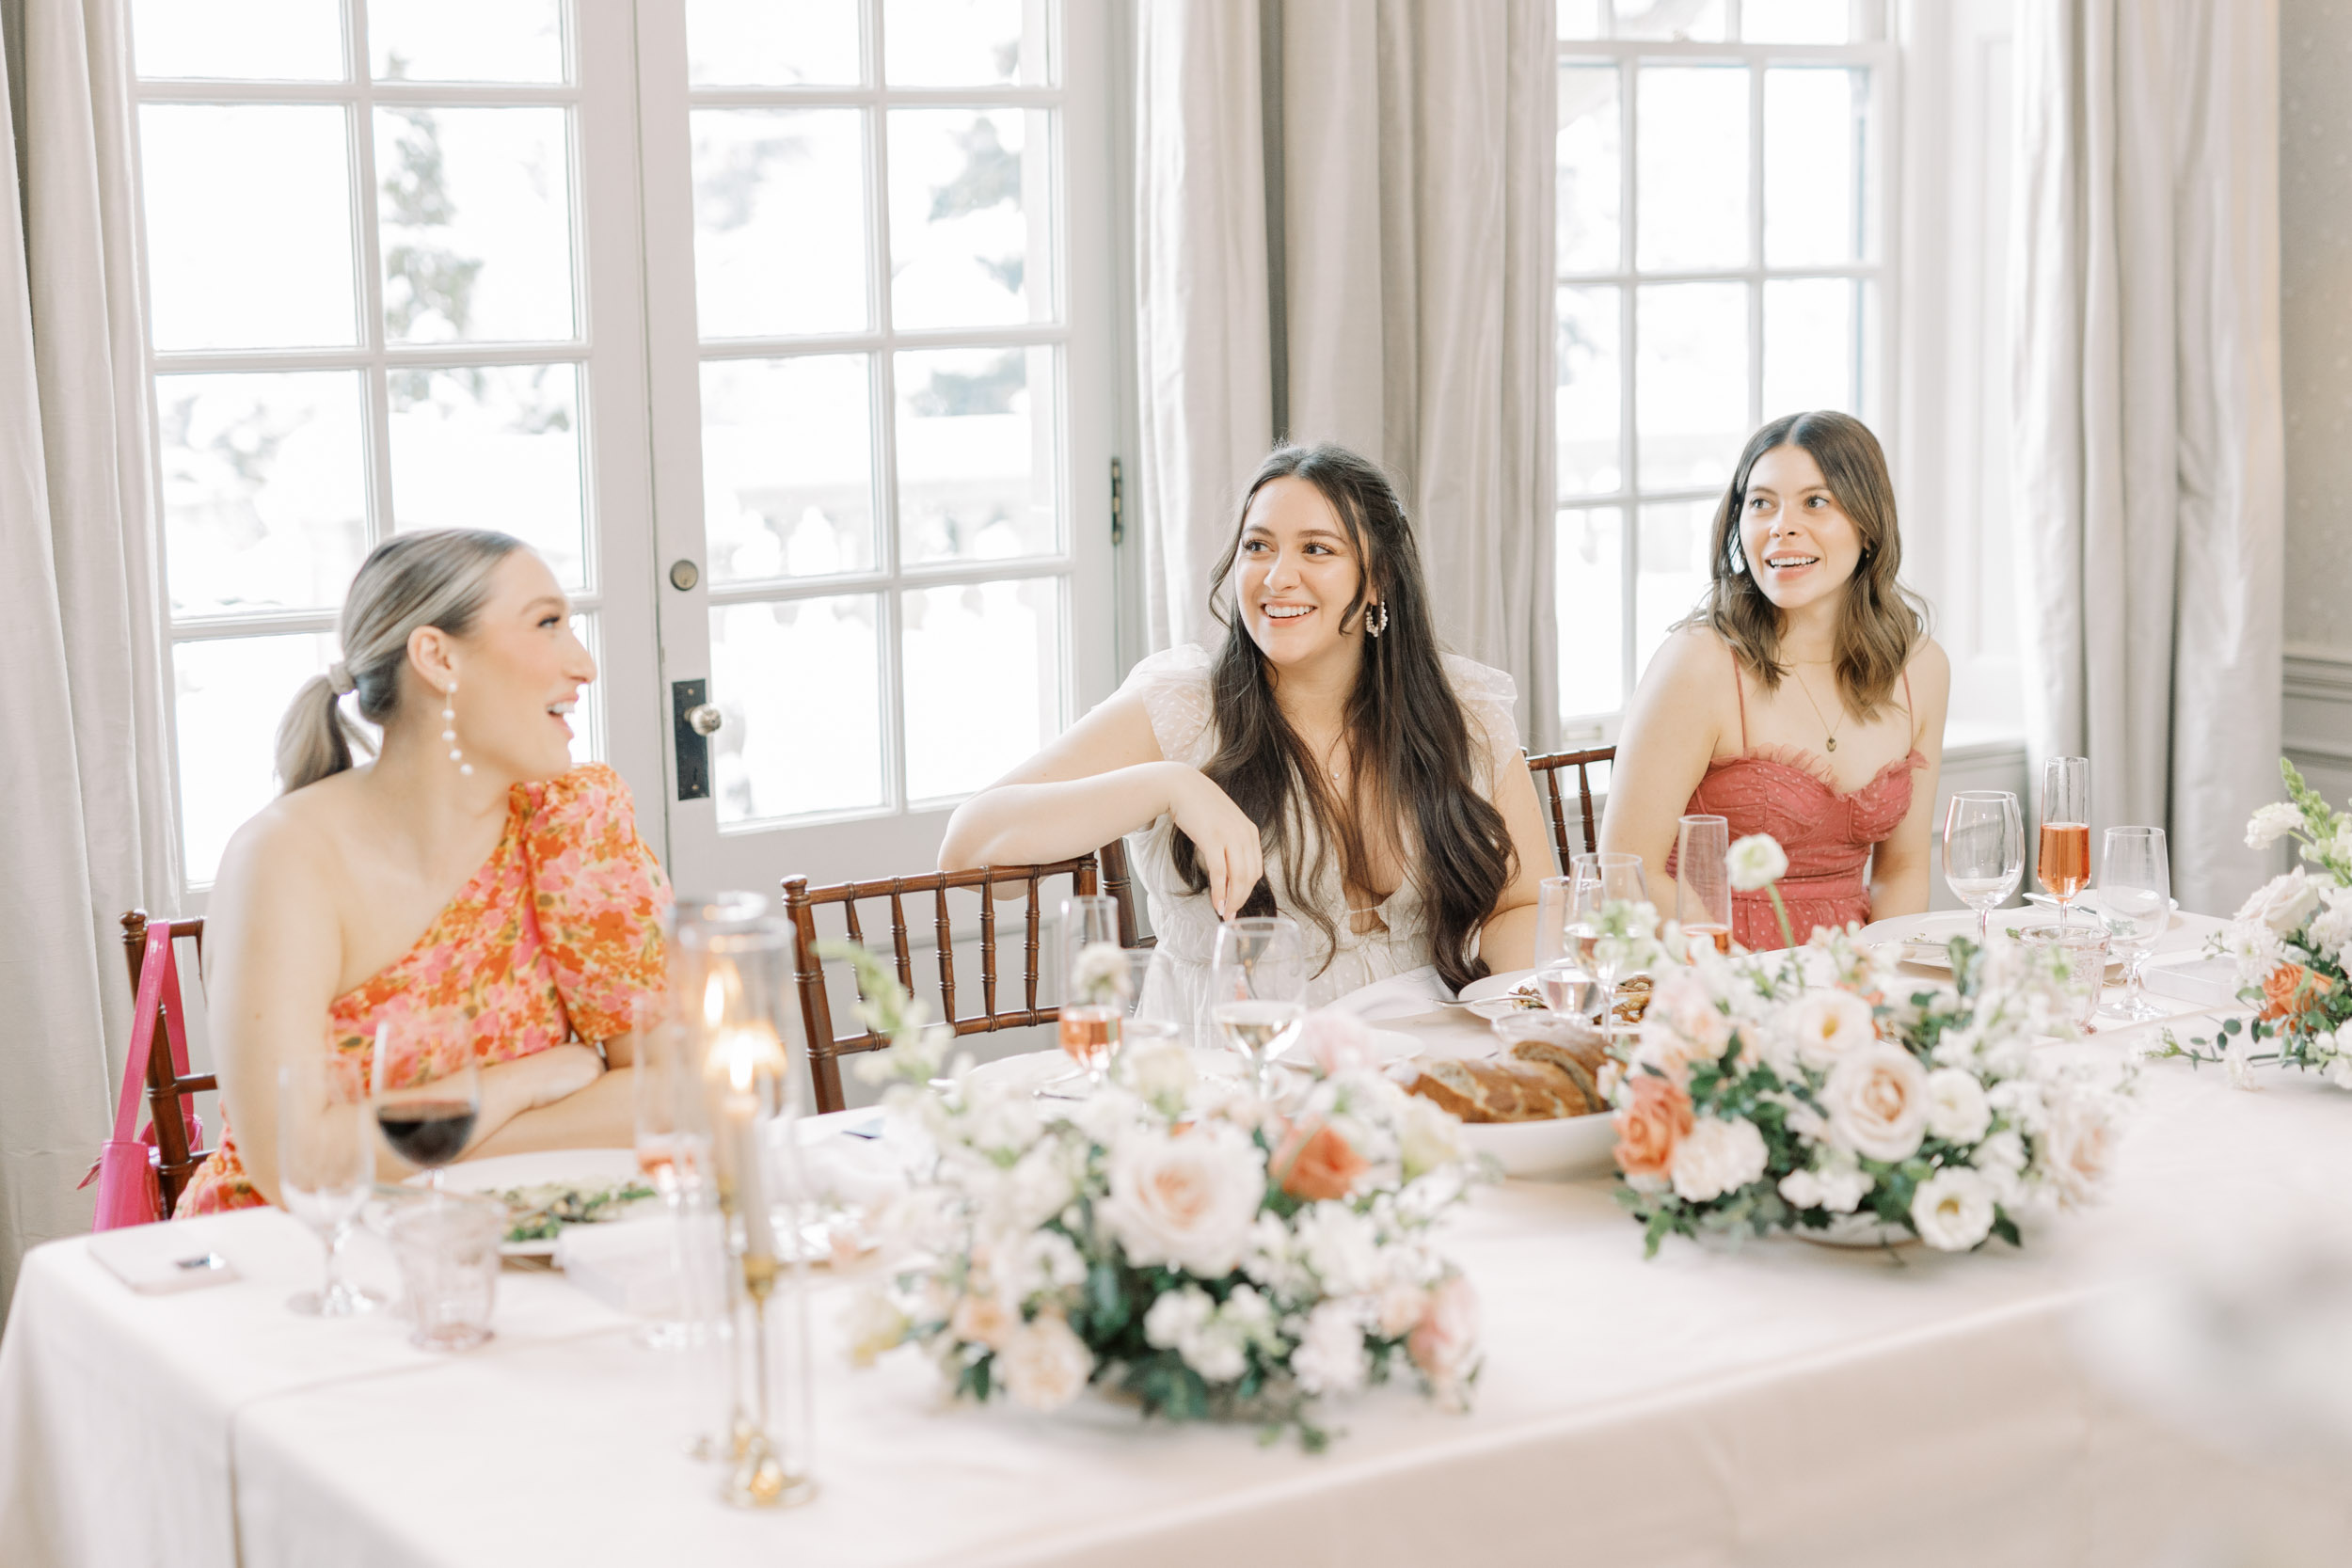 Bride laughing with bridesmaids at bridal shower